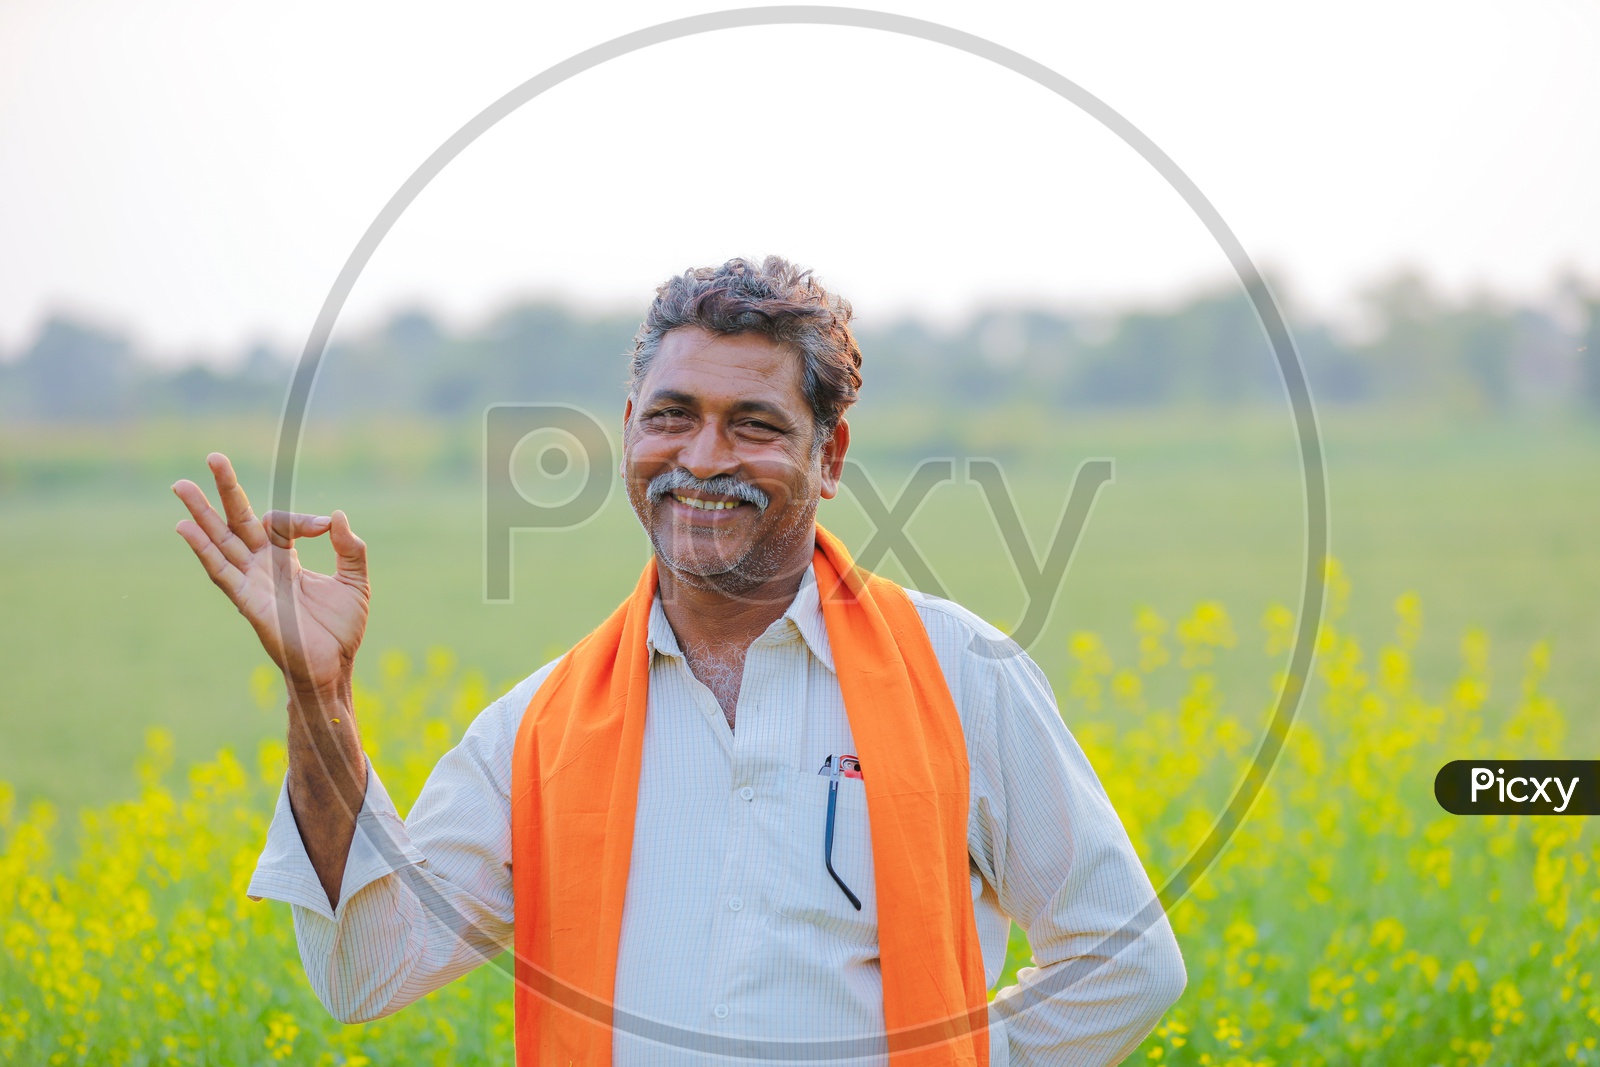 Indian Farmer In Agricultural Field With Happy Gestures Indicting The Crop